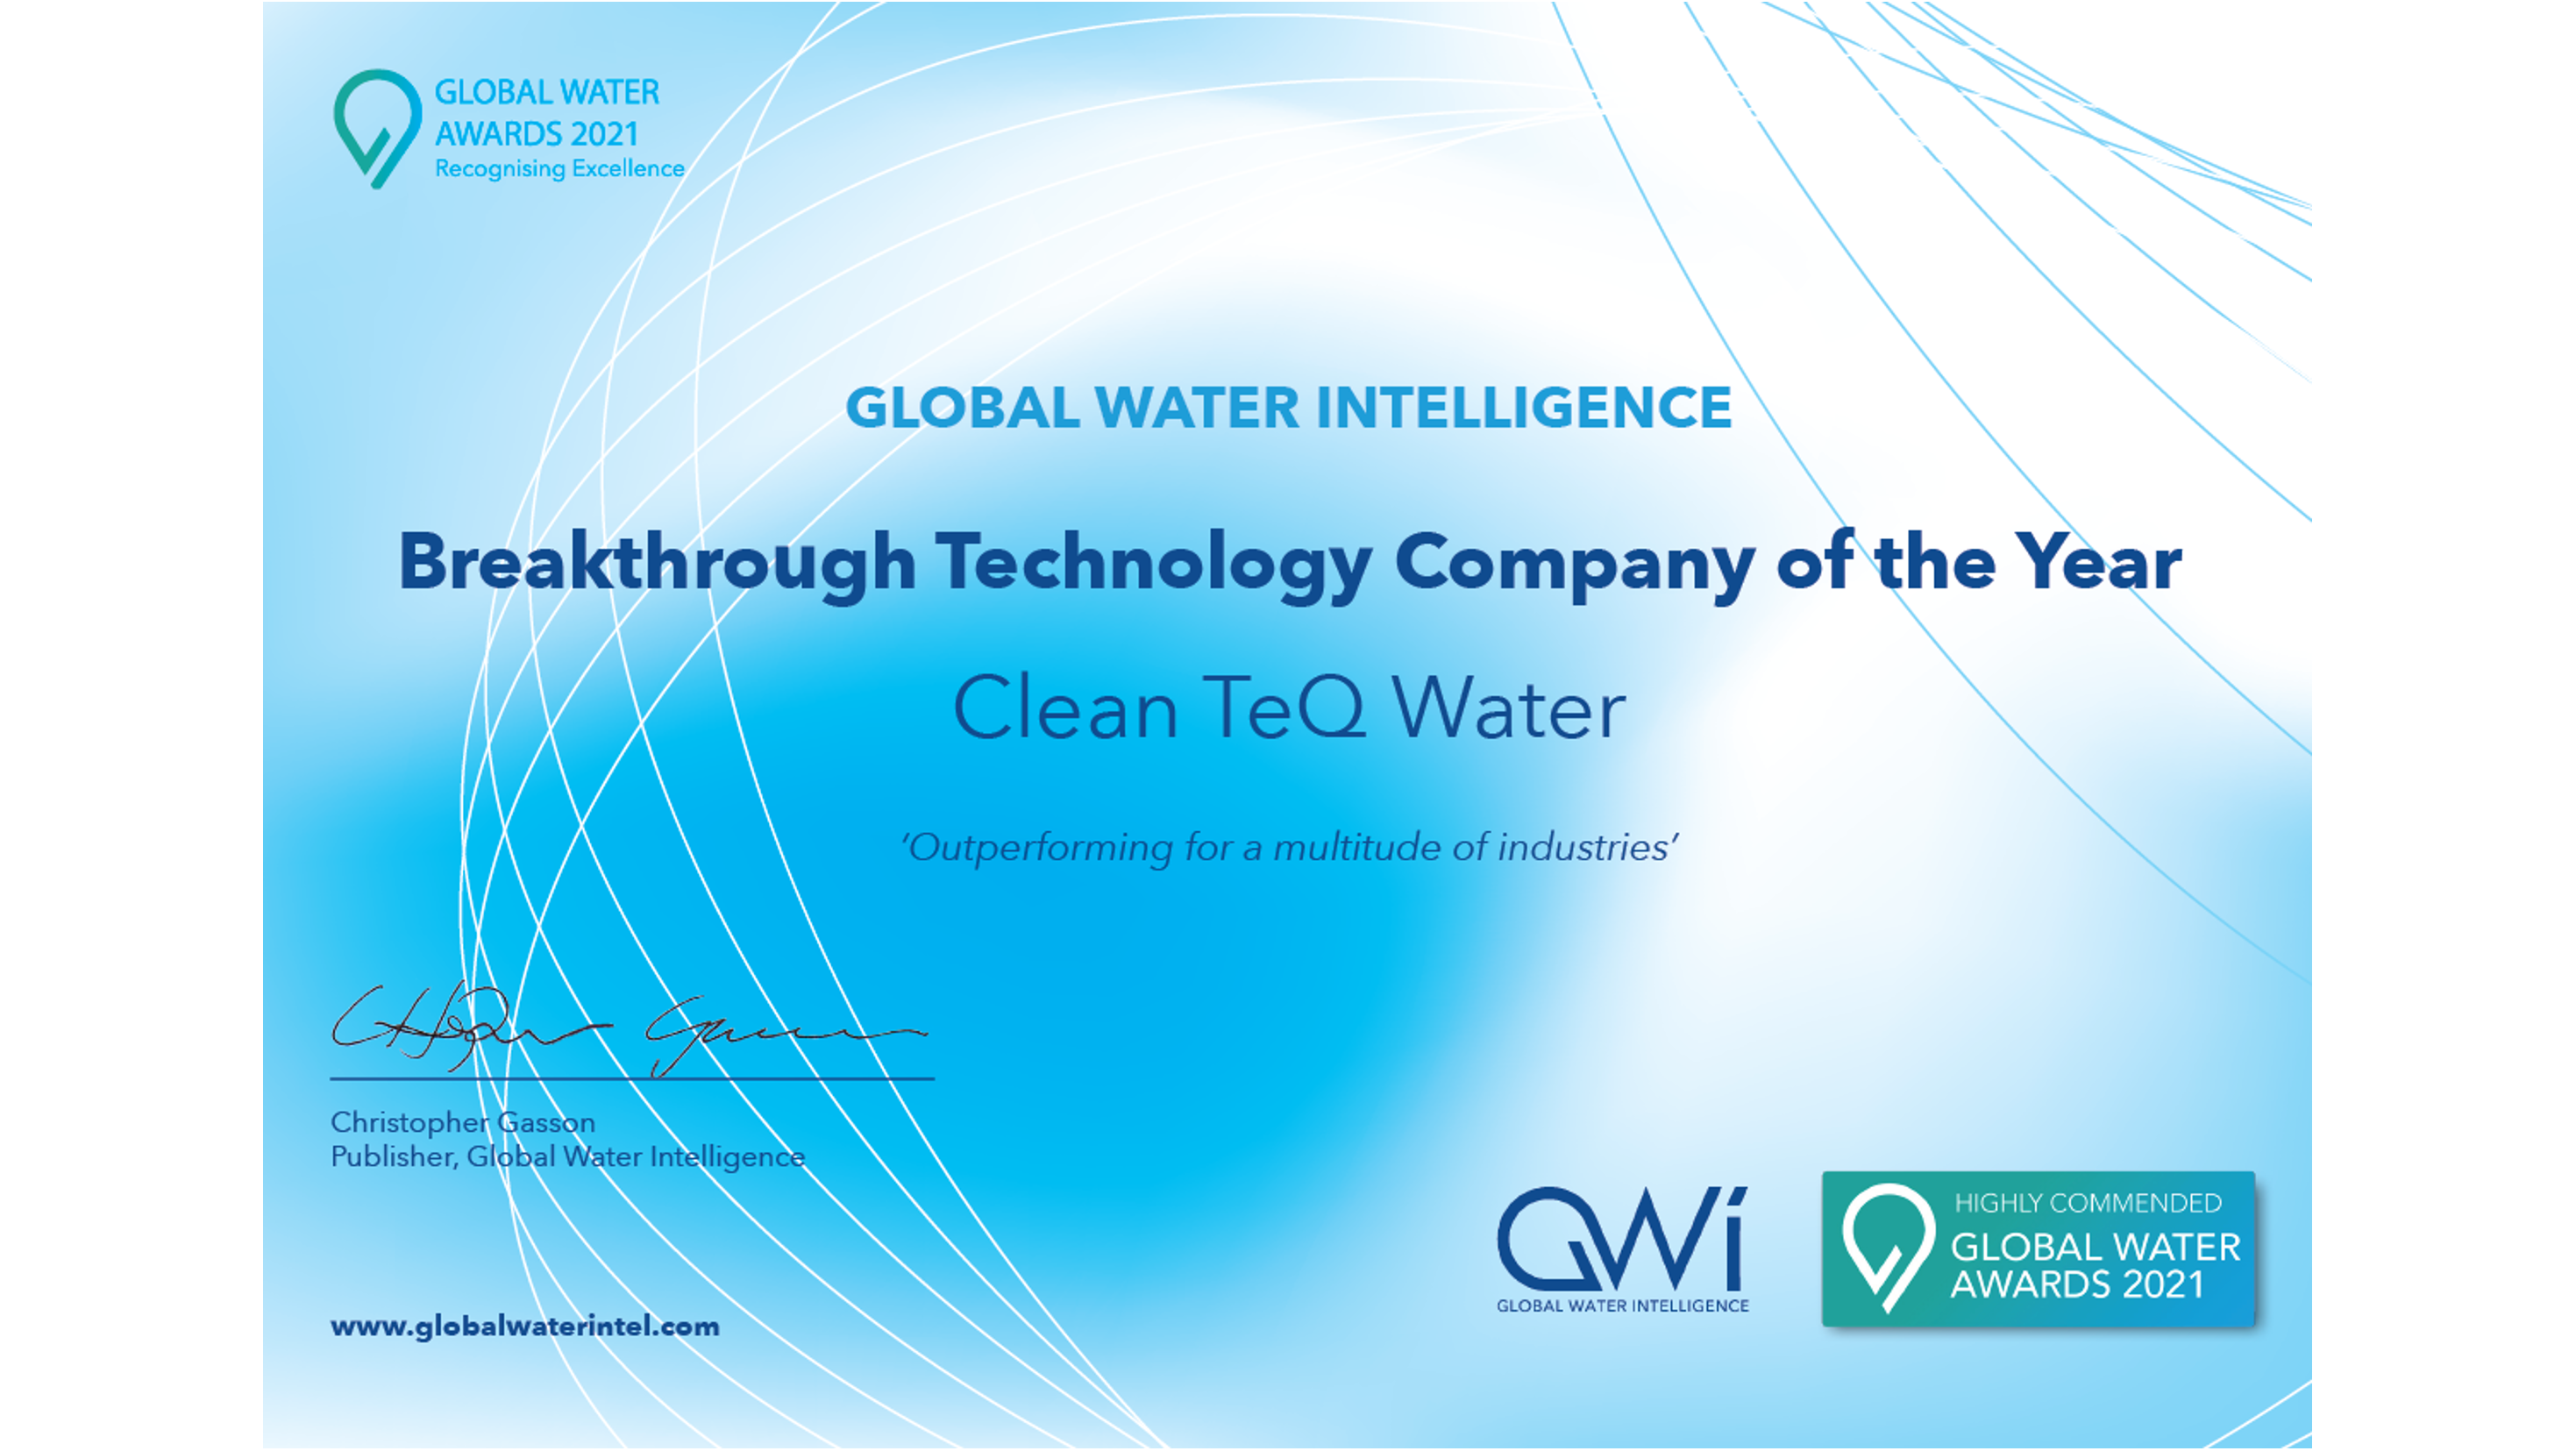 Clean TeQ Water Receives Highly Commended Award